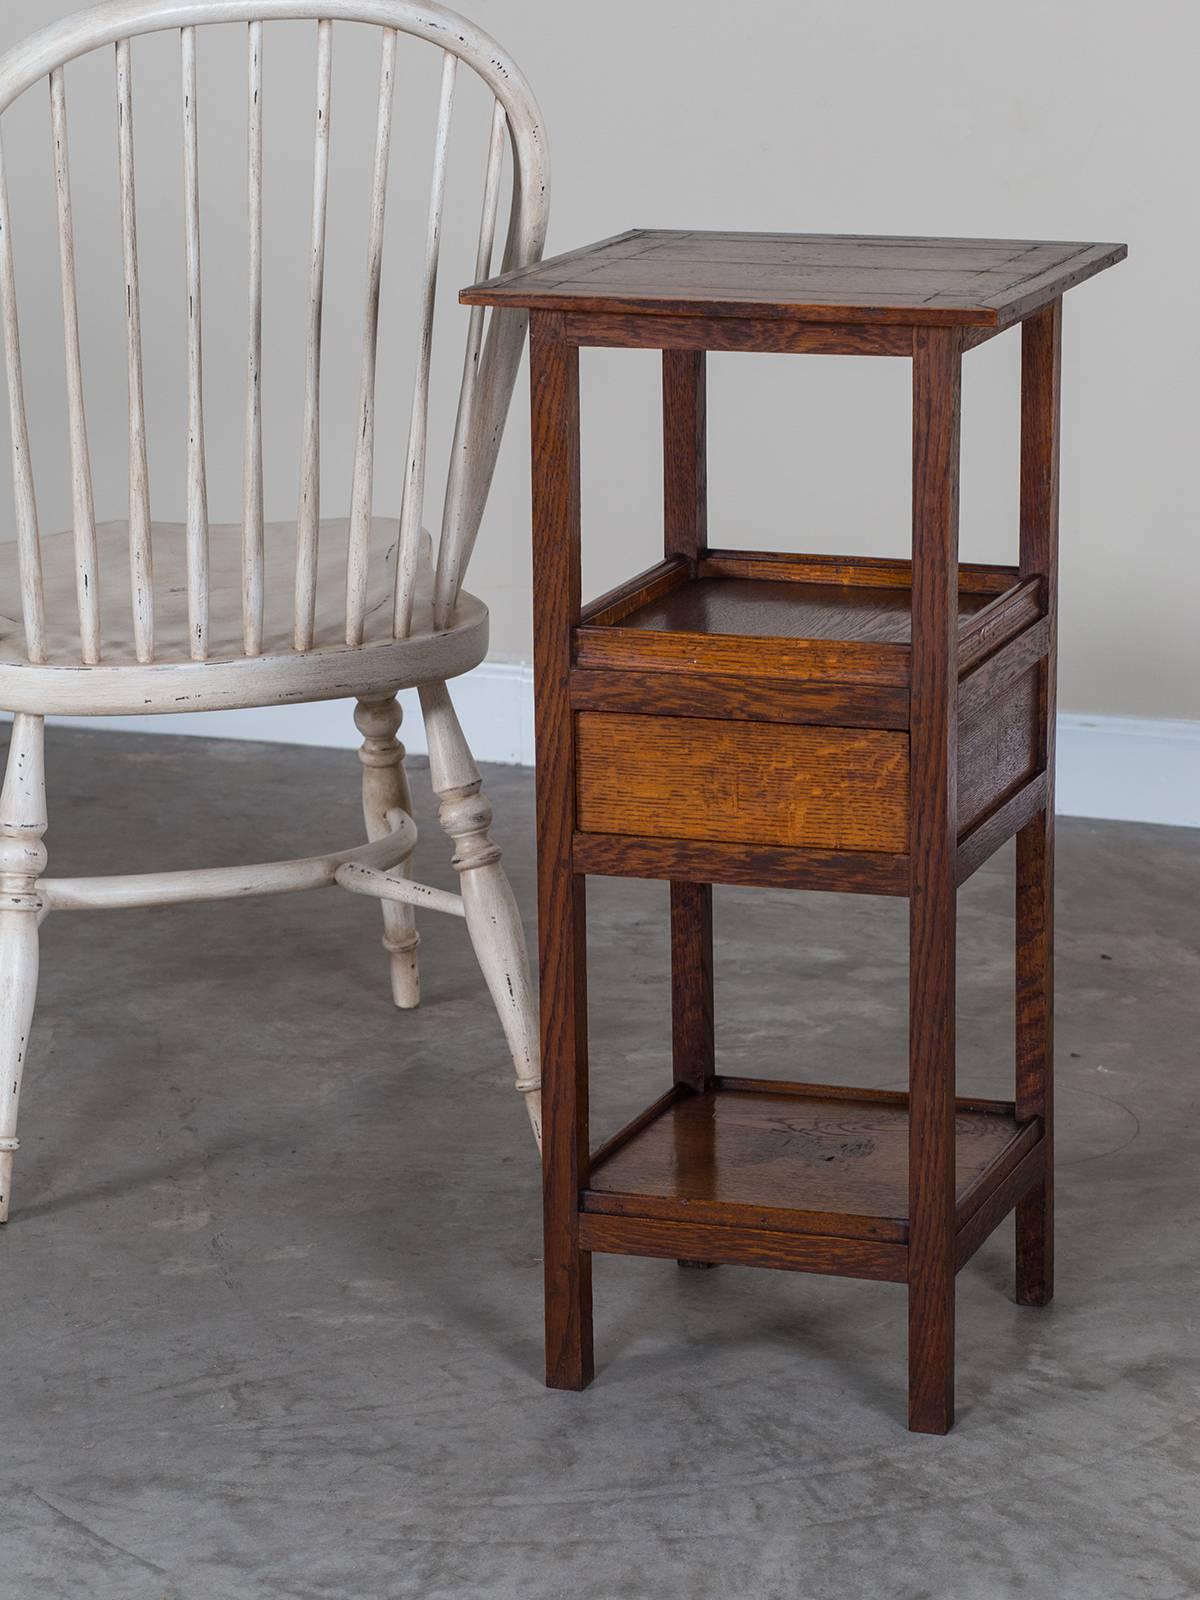 Receive our new selections direct from 1stdibs by email each week. Please click Follow Dealer below and see them first!

The lines of this antique Arts and Crafts period table circa 1885 showcase the defining characteristics of simple elegance and